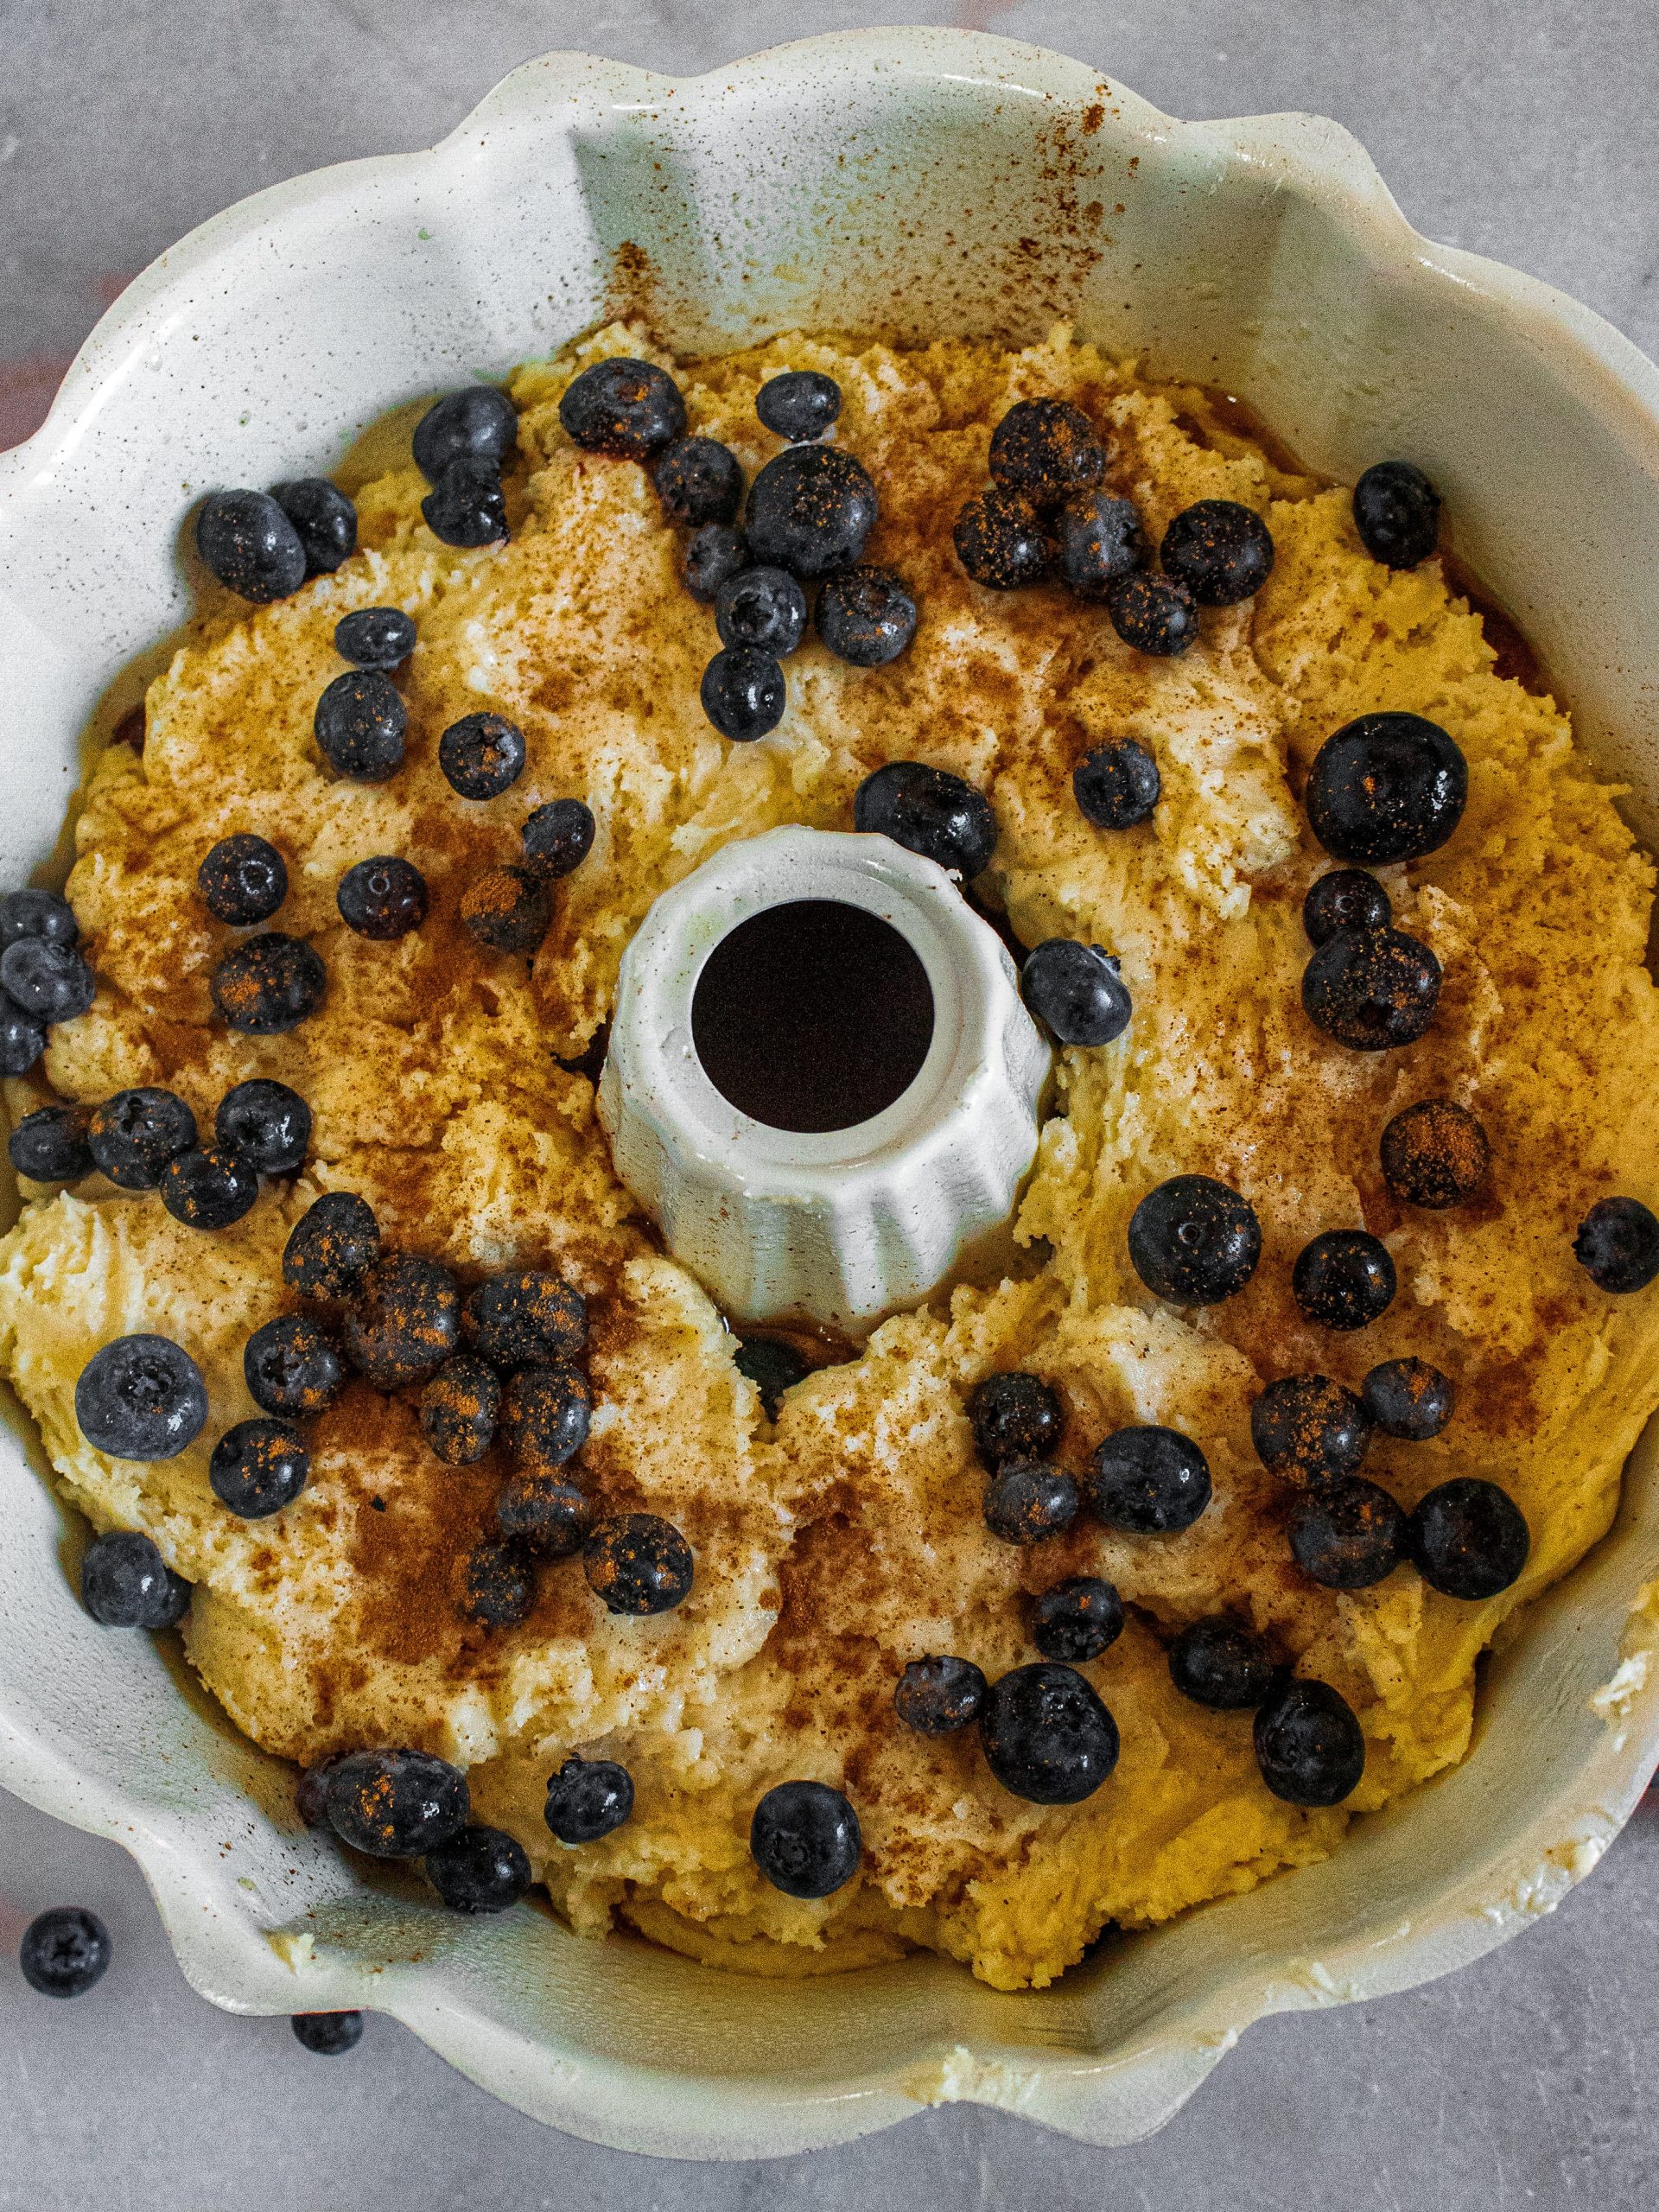 Add the remaining batter to the pan and press down, spreading out evenly over the first layer of batter. Top with the last remaining ½ of blueberries.